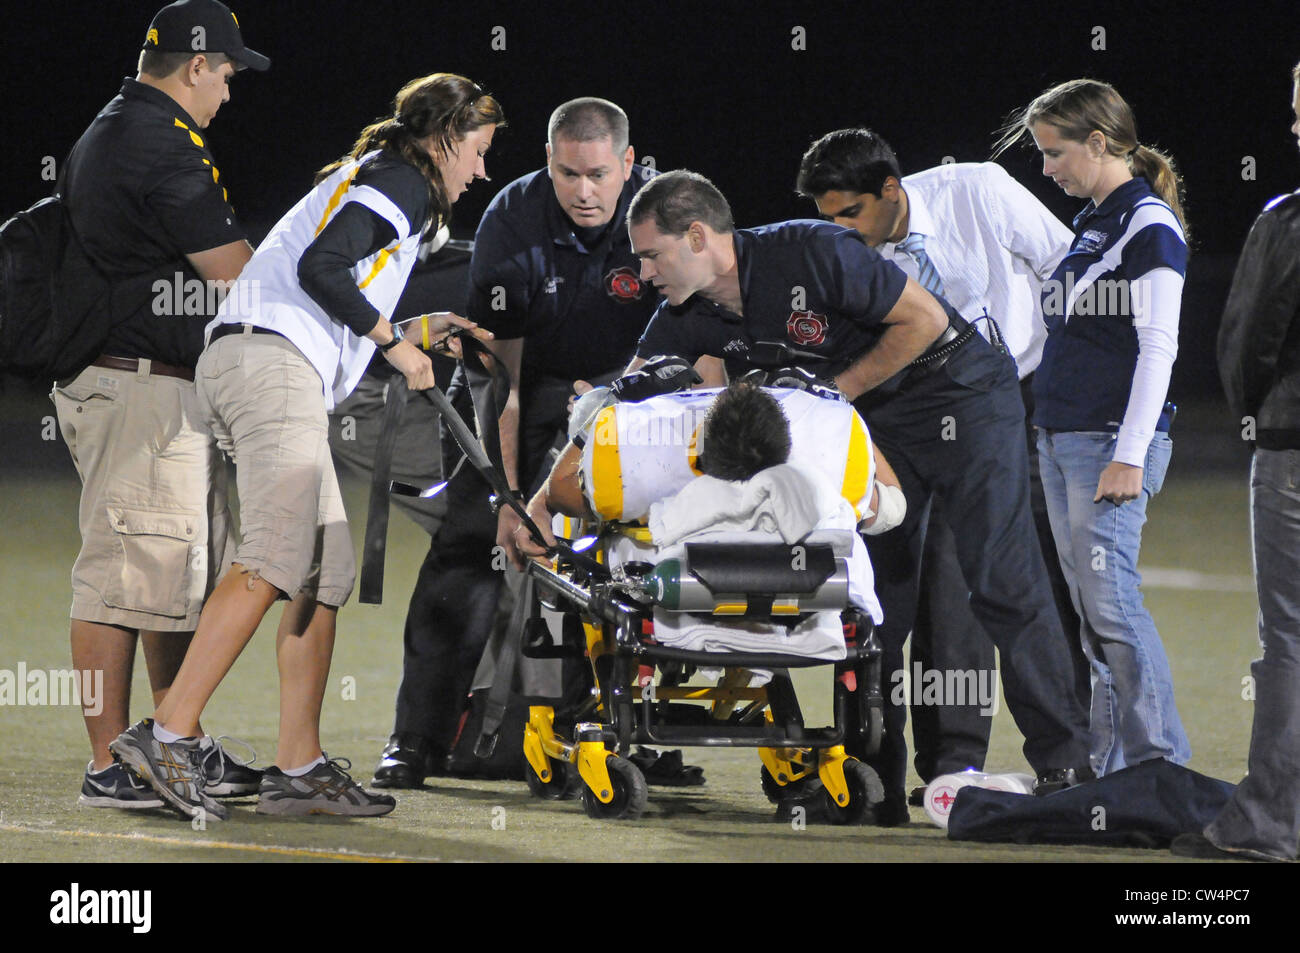 Football Player with broken leg is removed from field on stretcher after initial treatment by medical staff during a game. USA. Stock Photo